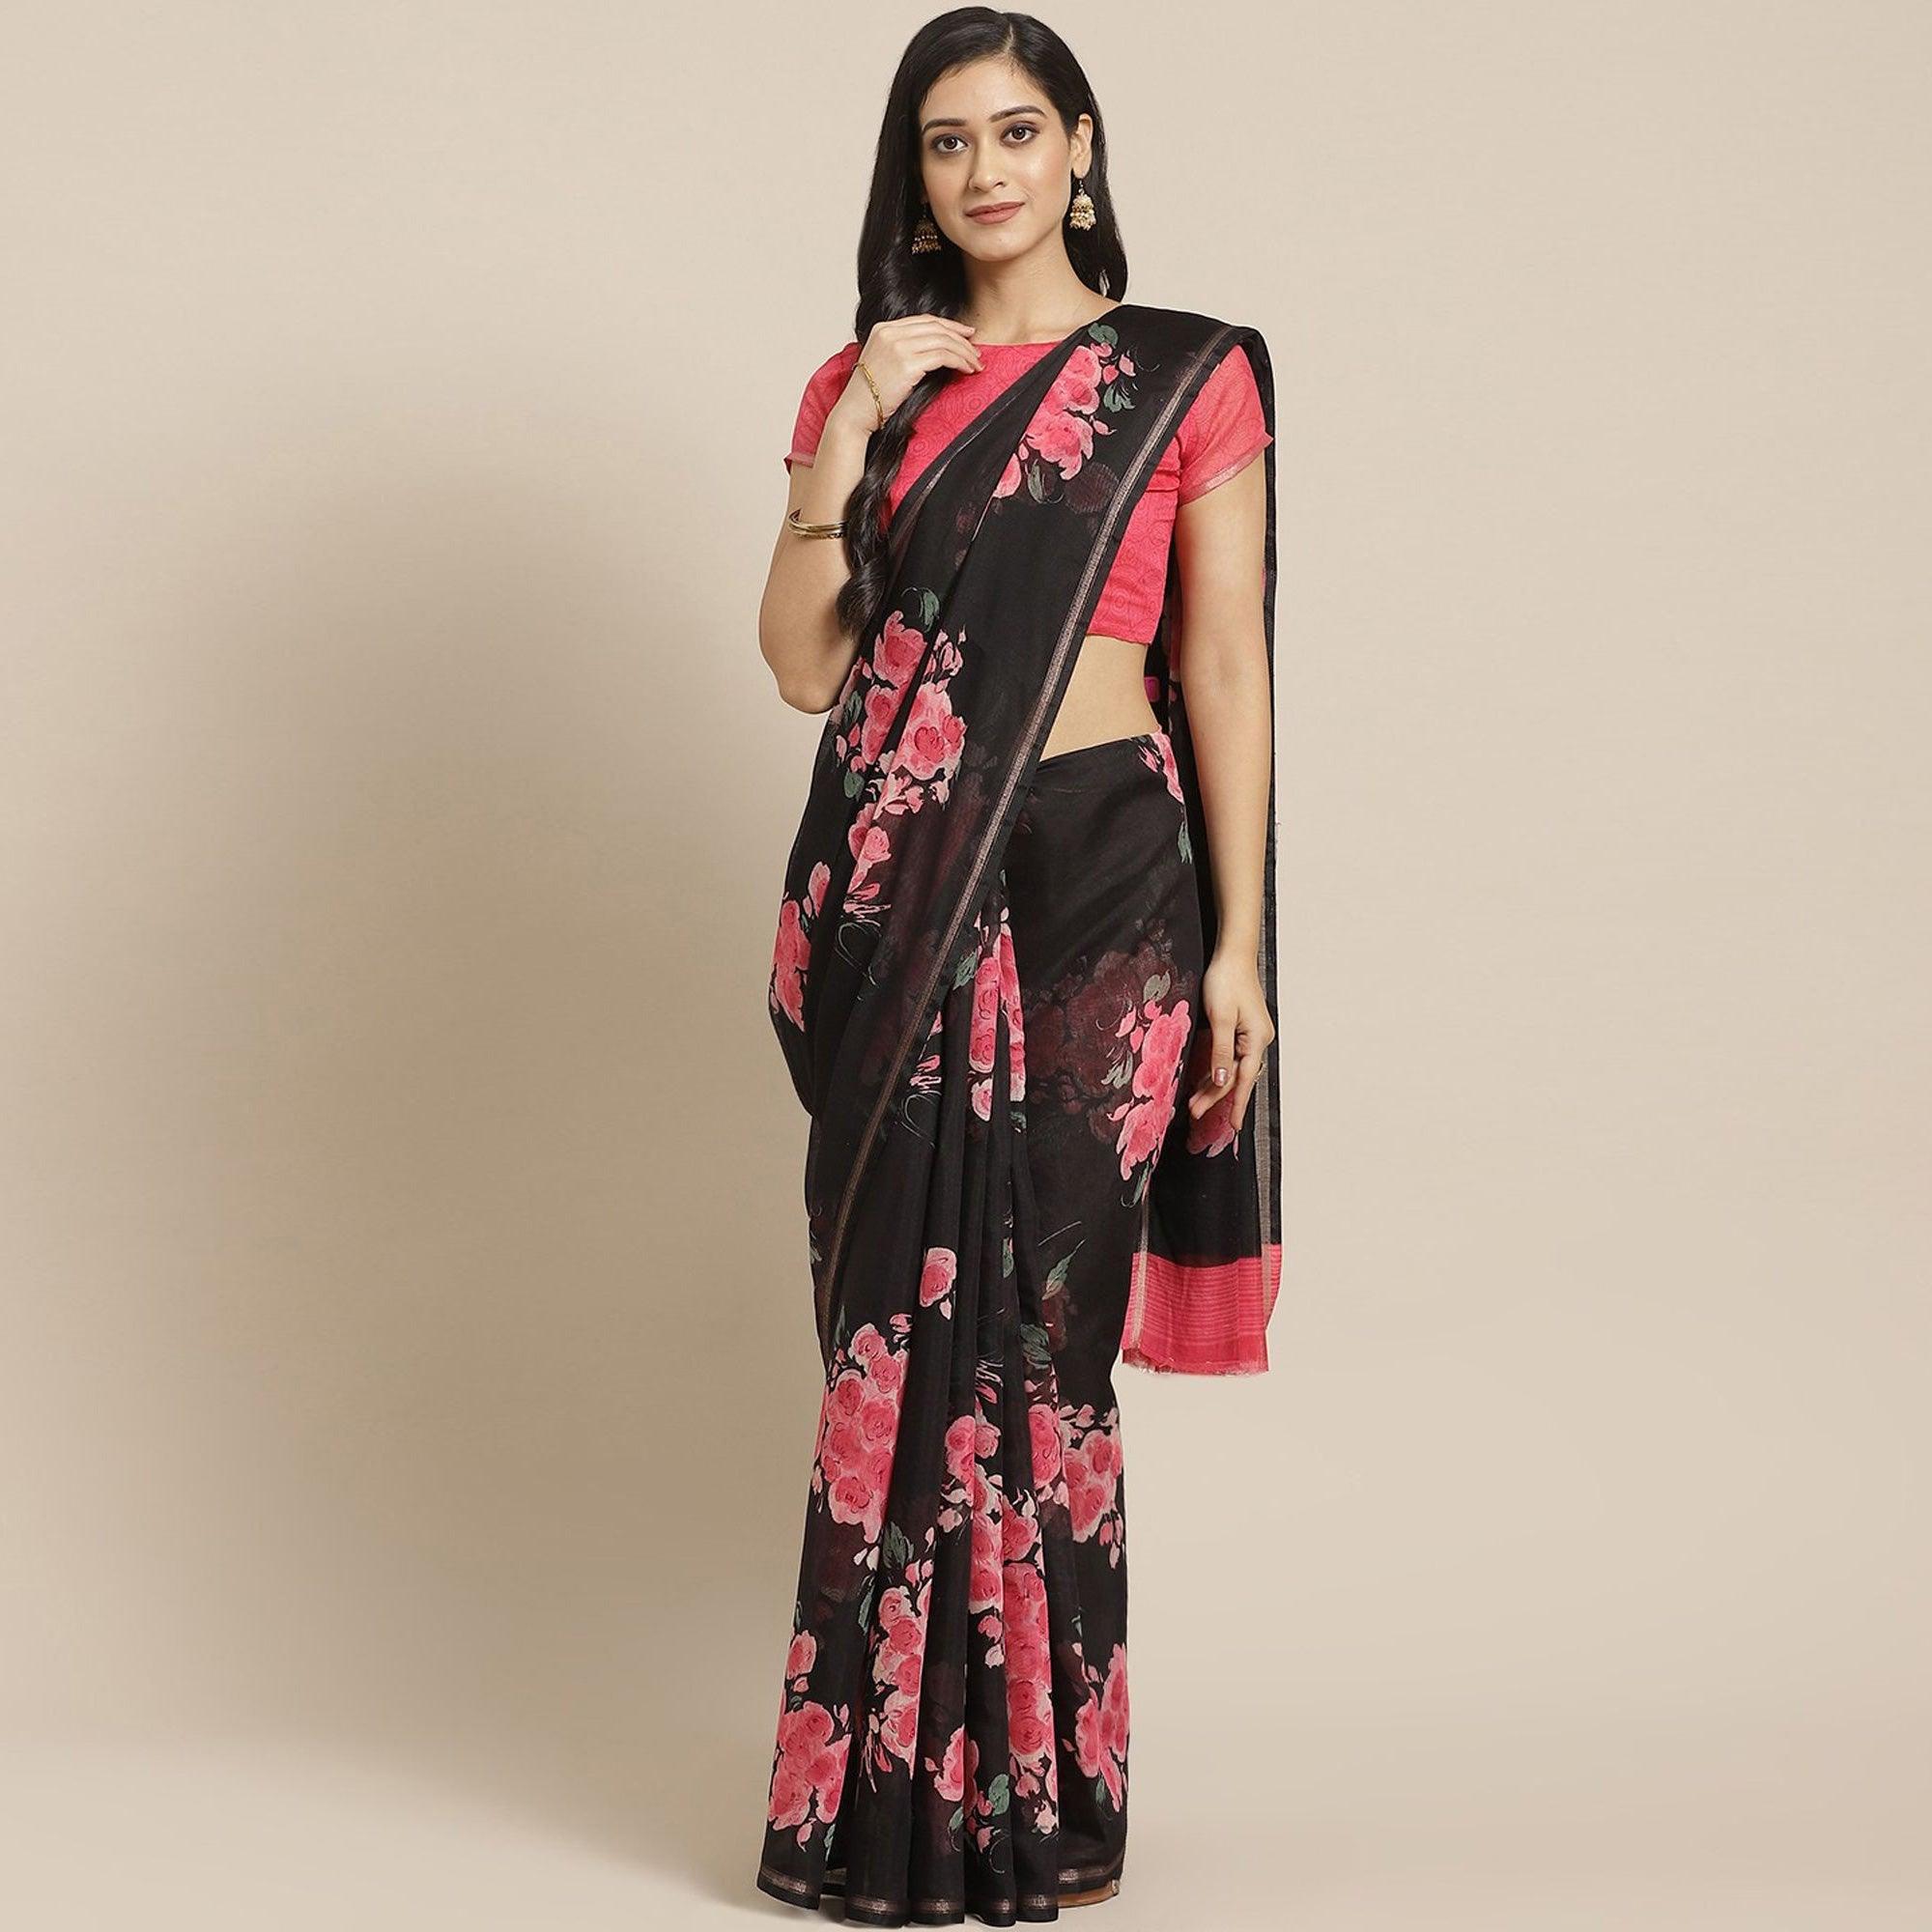 Radiant Black Colored Casual Wear Printed Cotton Blend Saree - Peachmode